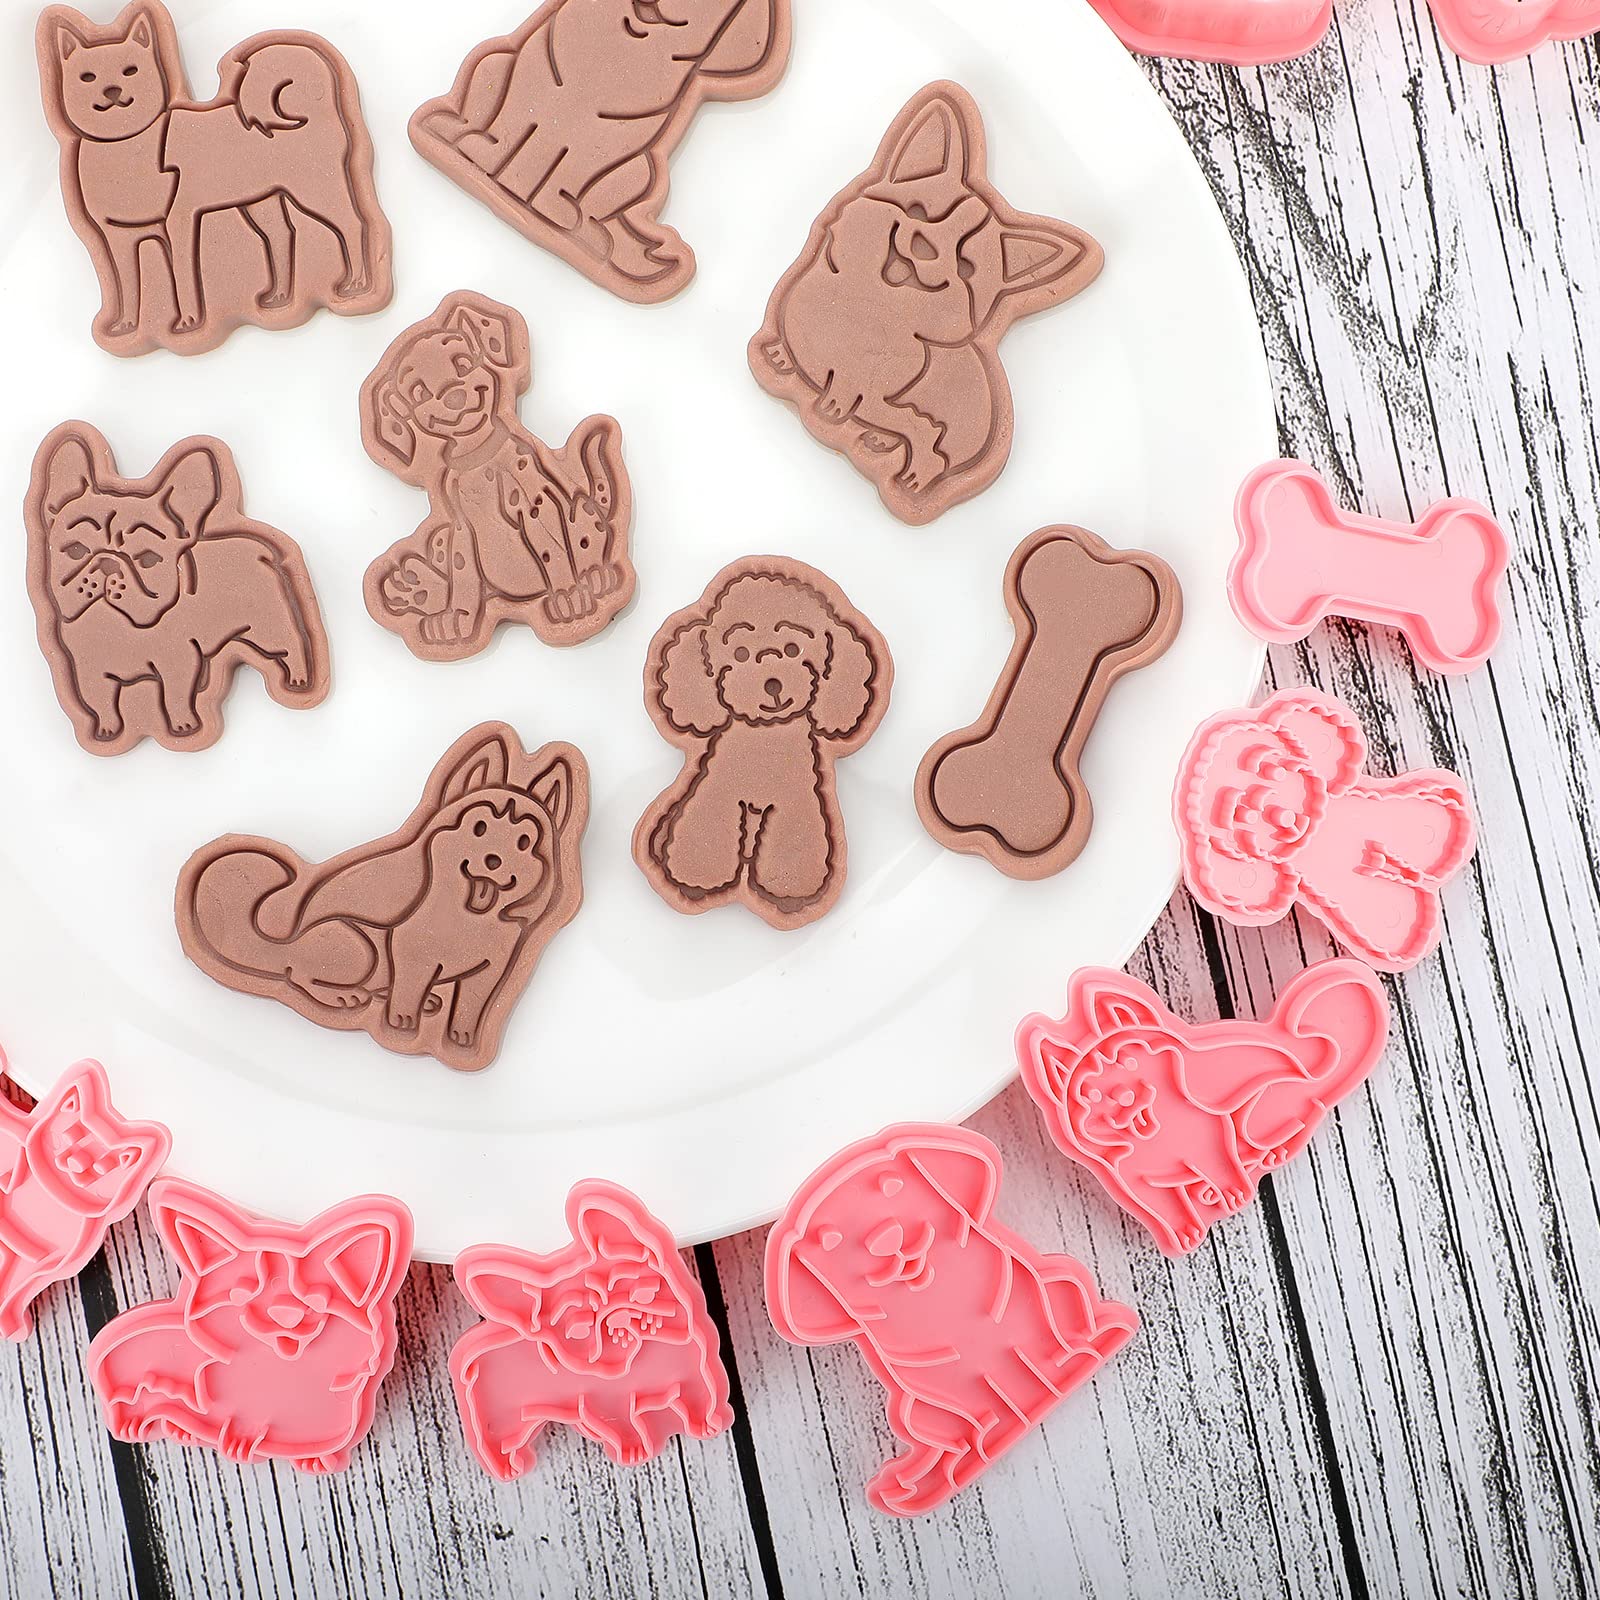 8 Pcs Dog Cookie Cutters with Plunger Stamps Set 3D Puppy Bone Shape Biscuit Cutter Funny Cartoon Cookie Stamps Stamped Embossed Dog Cookie Cutters for Treats DIY Cookie Baking Supplies (Vivid Style)